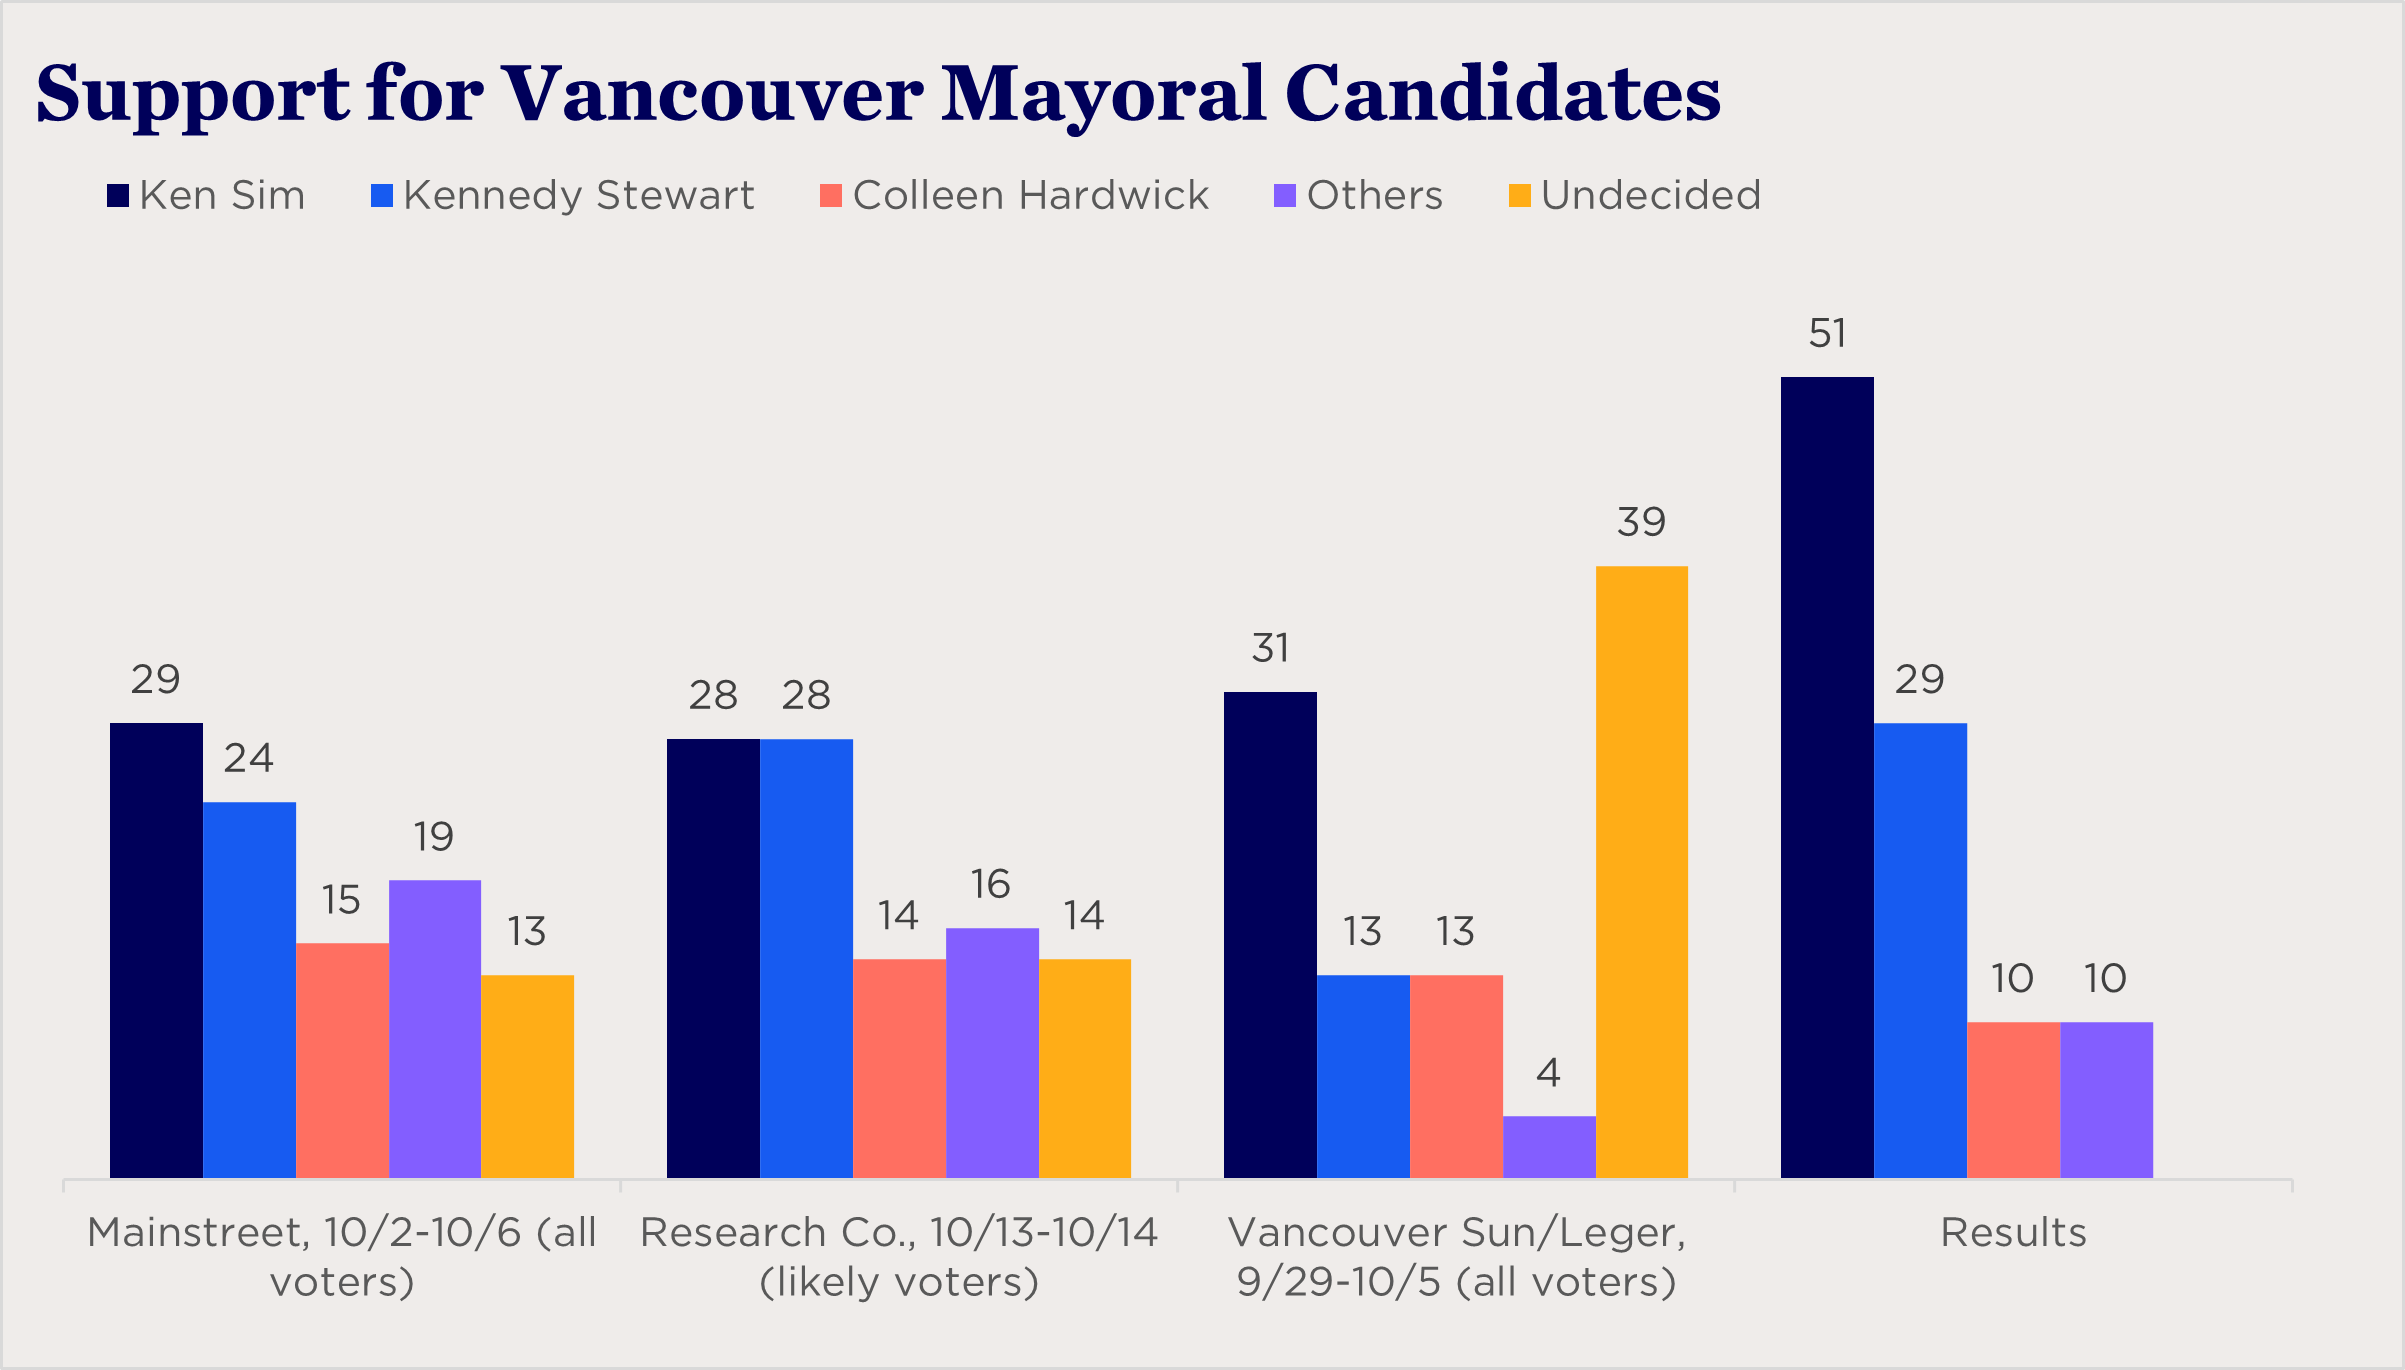 "bar chart showing support for Vancouver candidates across three polls"